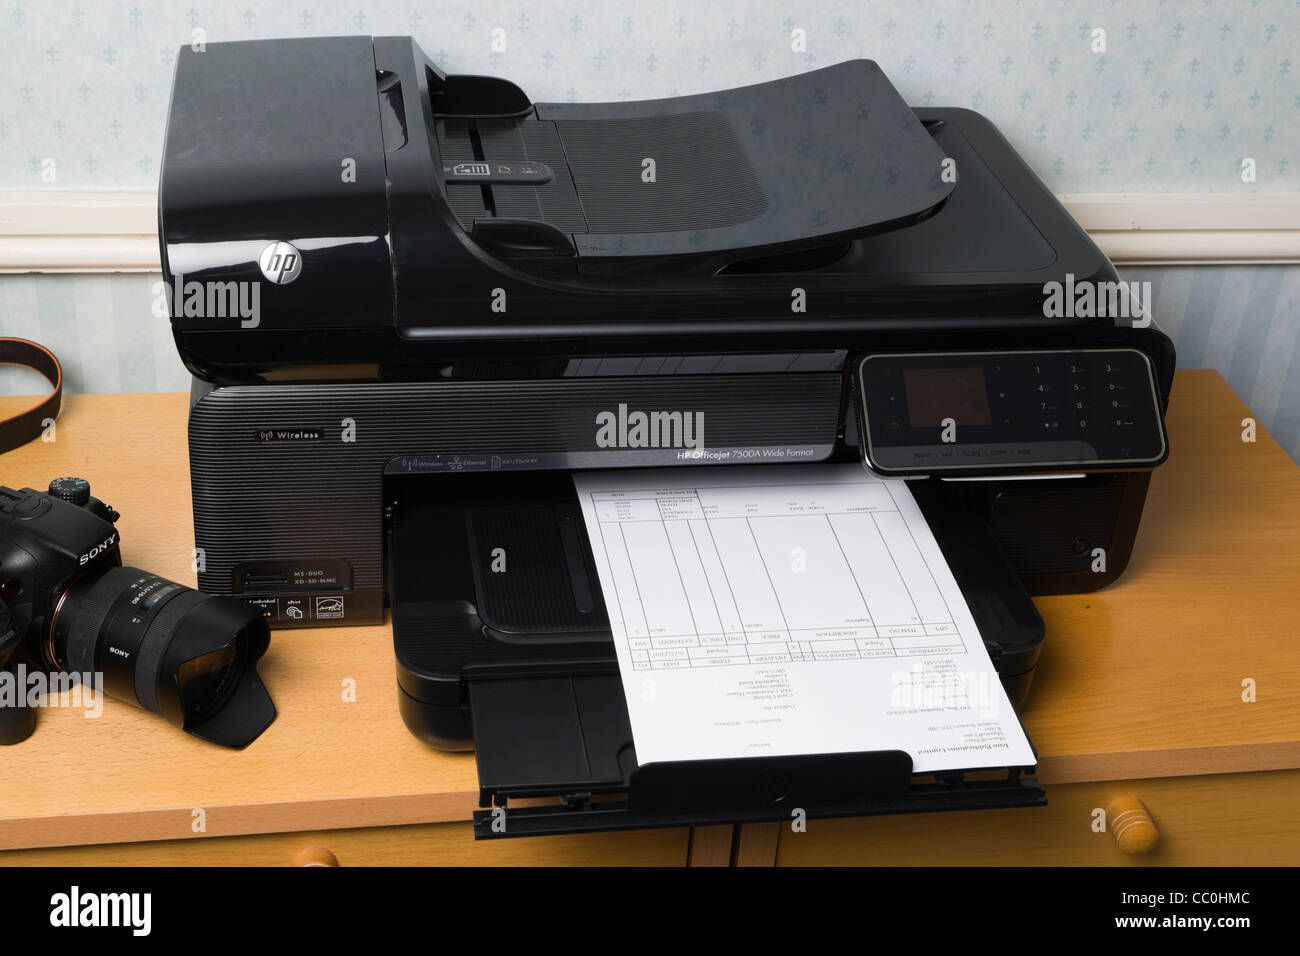 An HP 7500 series all-in-one office inkjet printer which prints over A3  size, see Description Stock Photo - Alamy